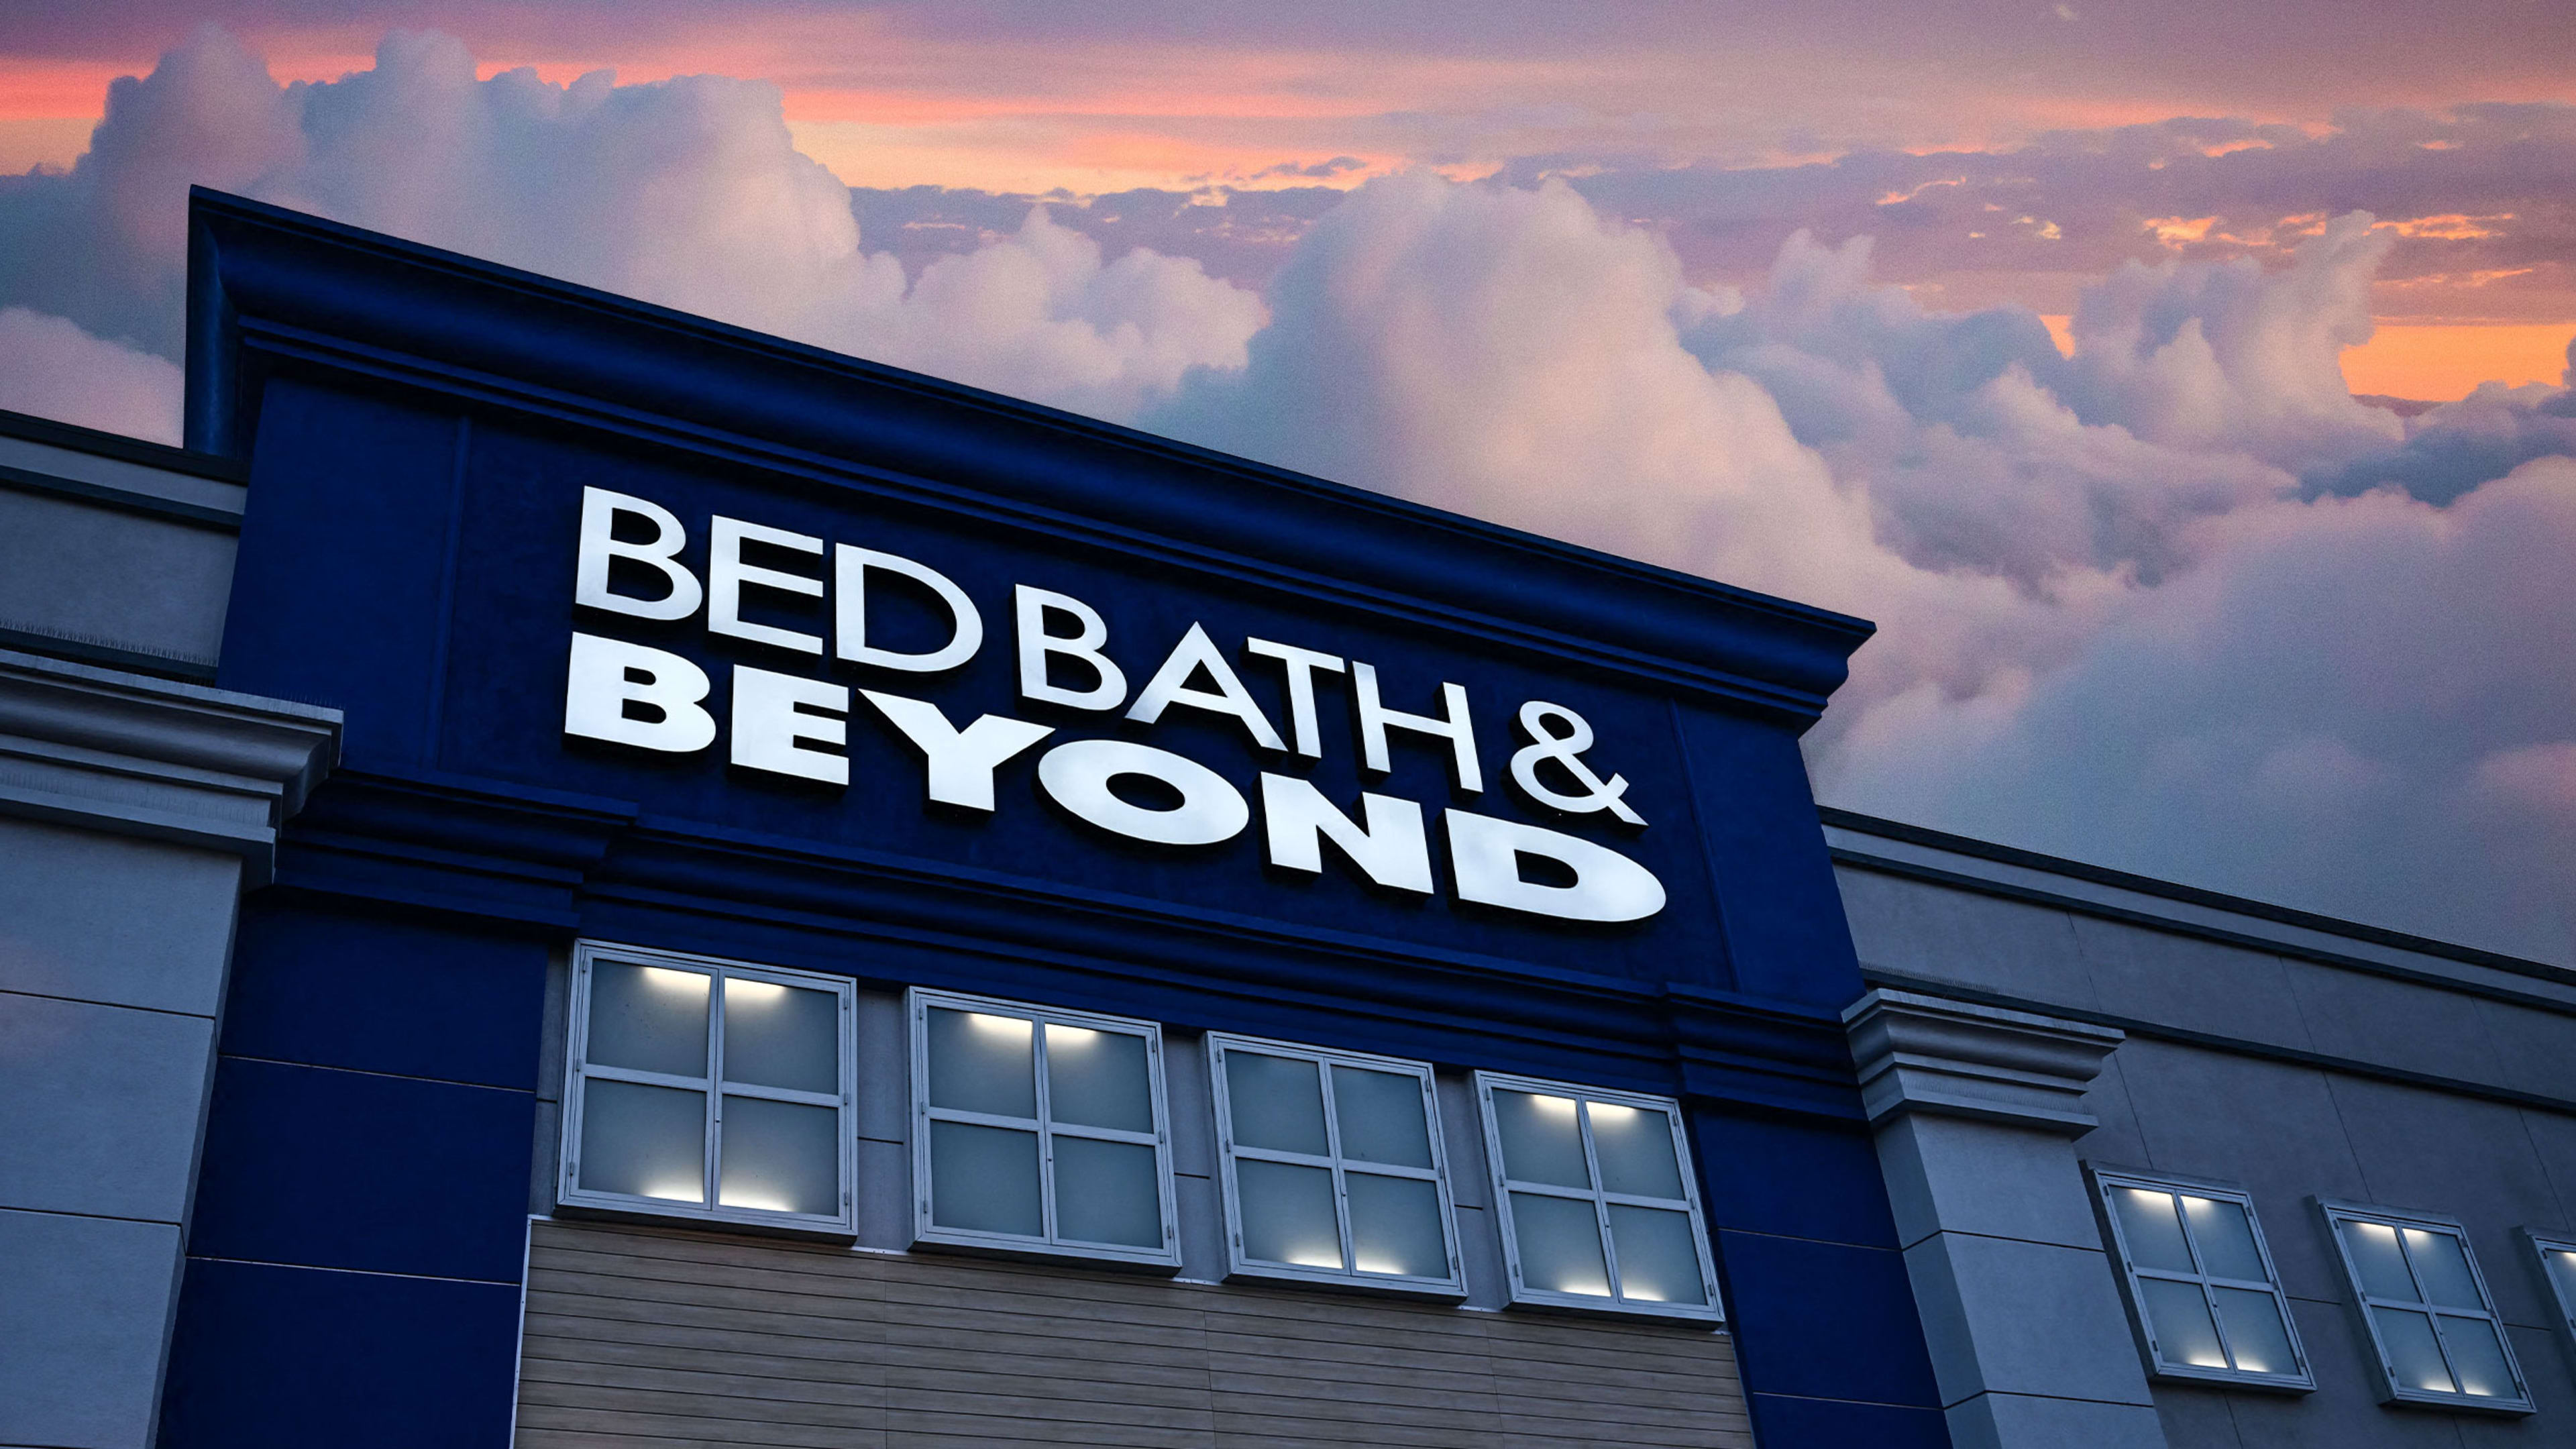 What’s next for Bed, Bath & Beyond now that Overstock.com has bought its assets?